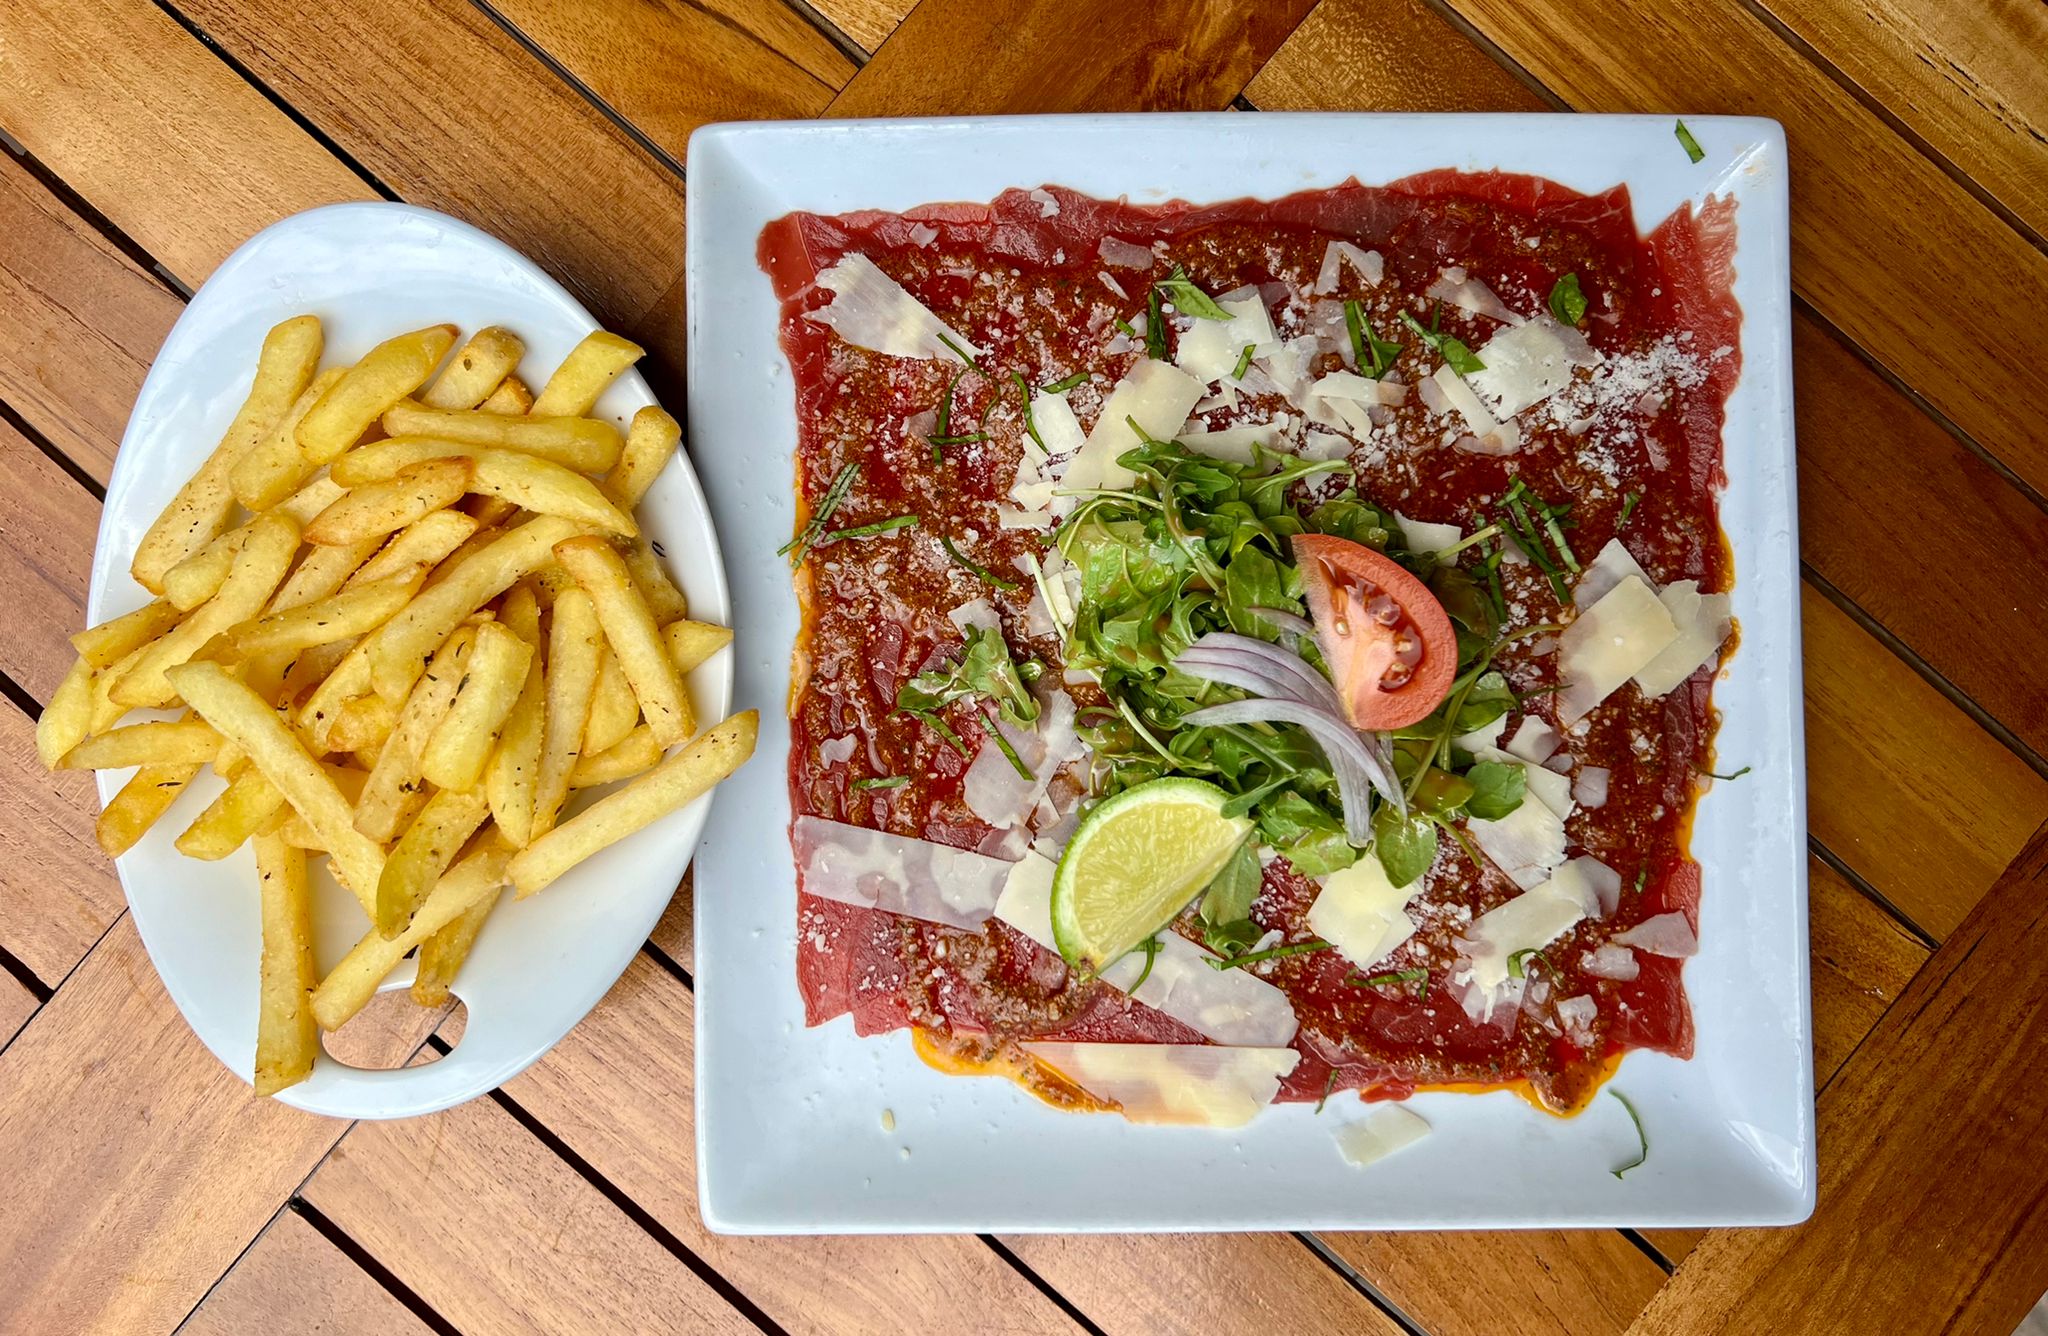 Beef carpaccio with red pesto served with fries and salad